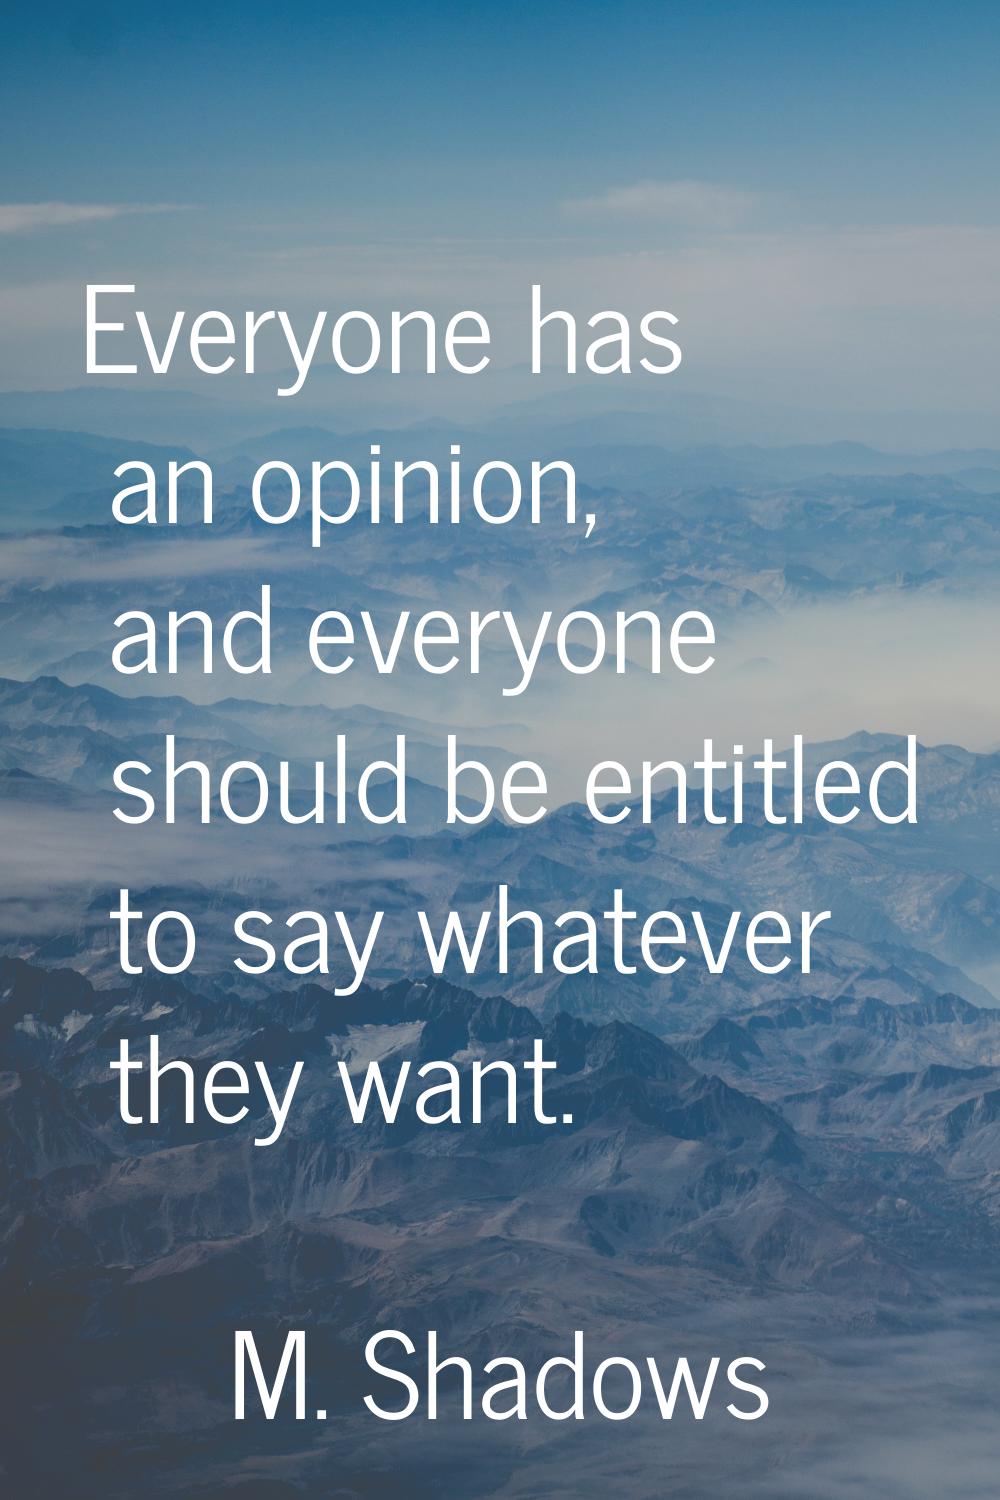 Everyone has an opinion, and everyone should be entitled to say whatever they want.